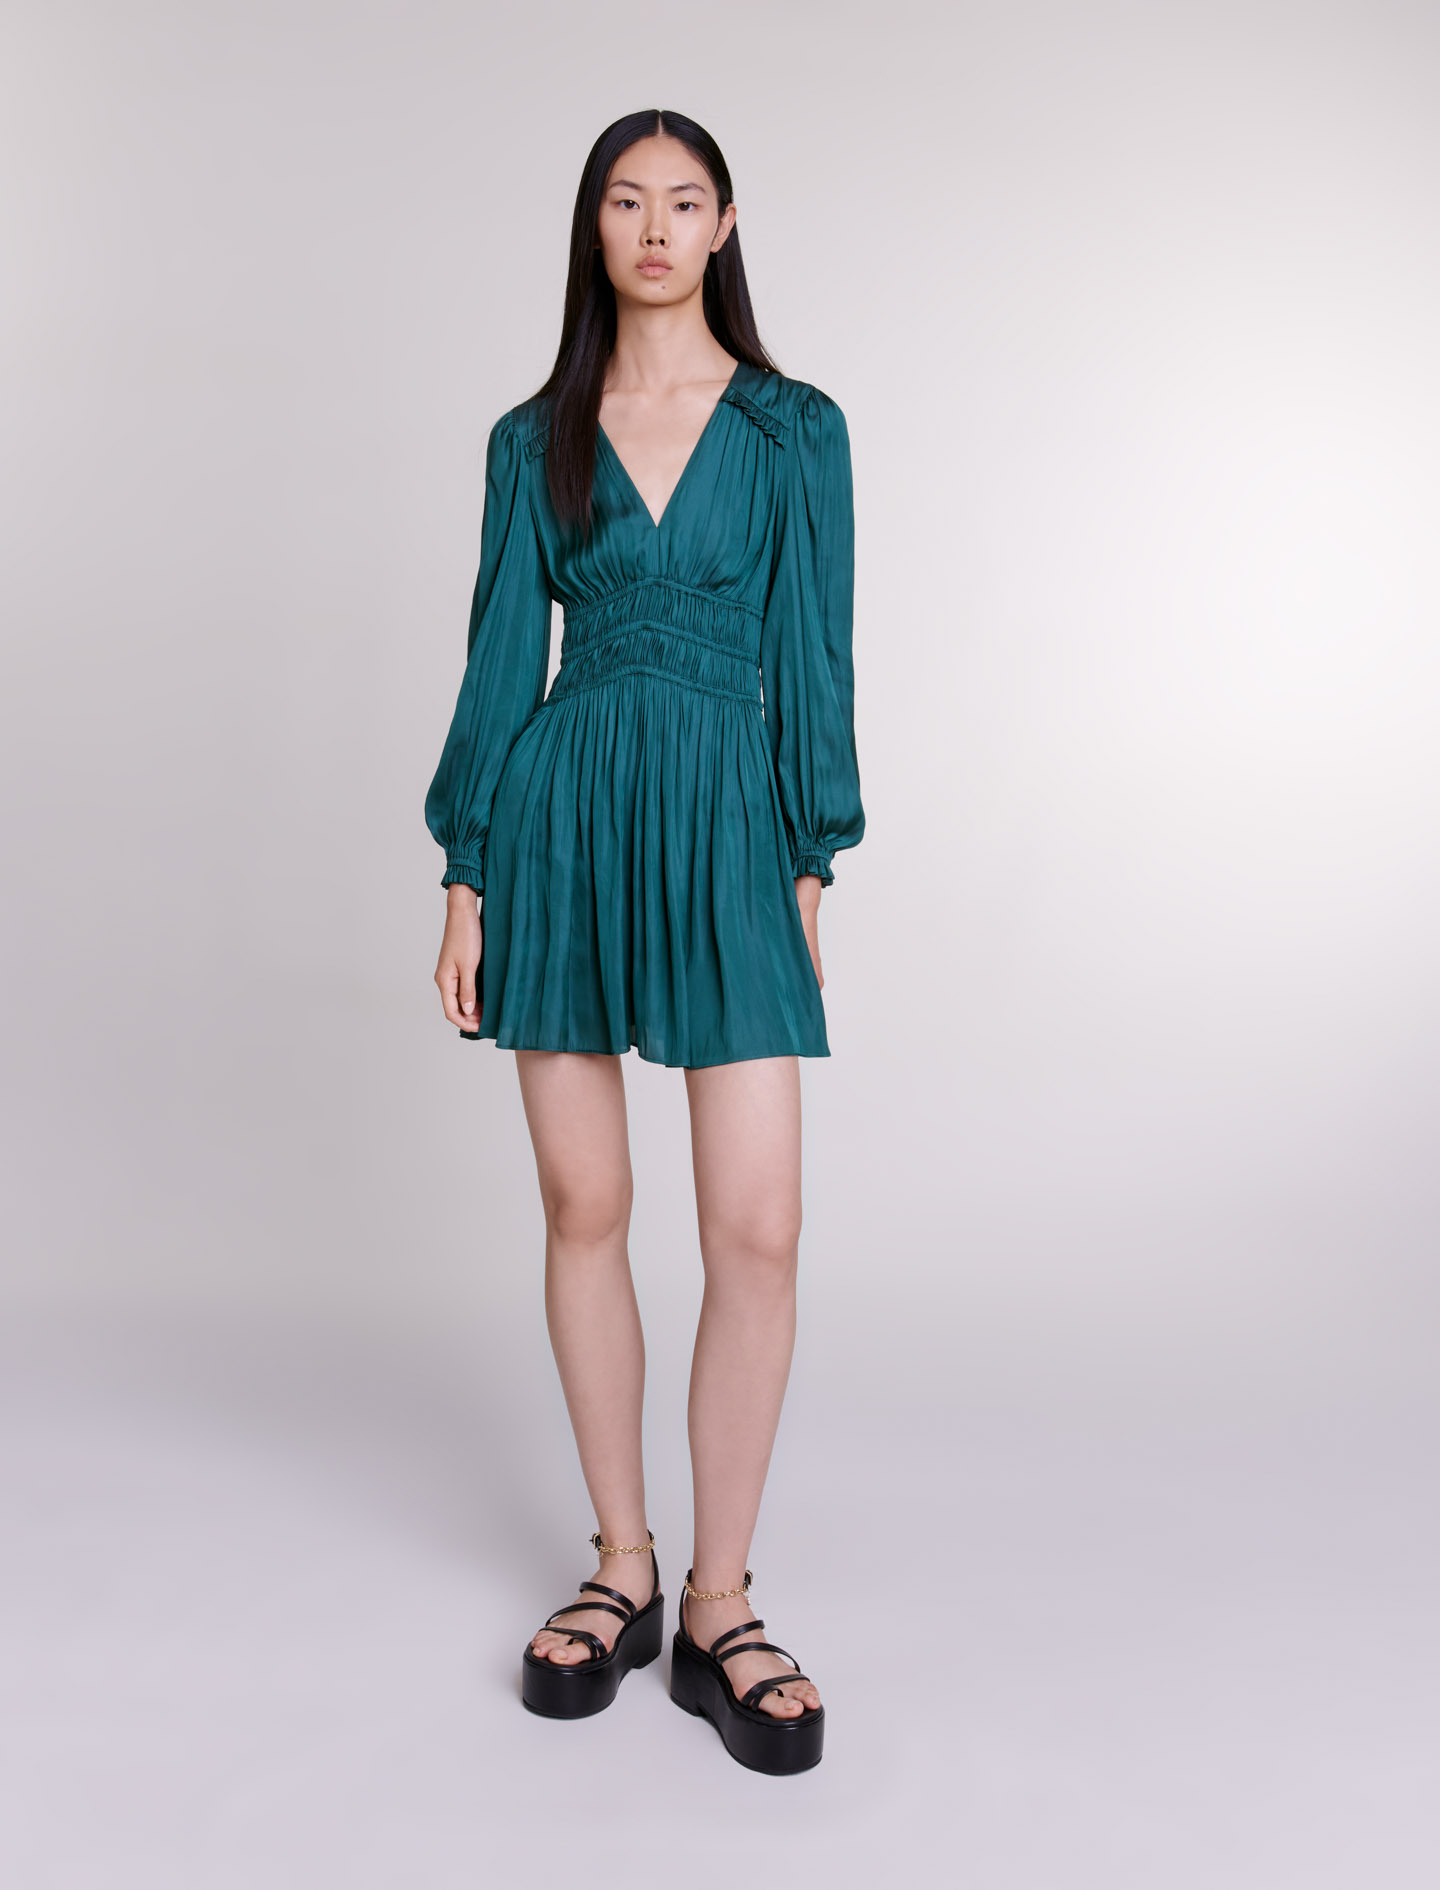 Maje Woman's polyester Short satin dress for Spring/Summer, in color Dark green / Green